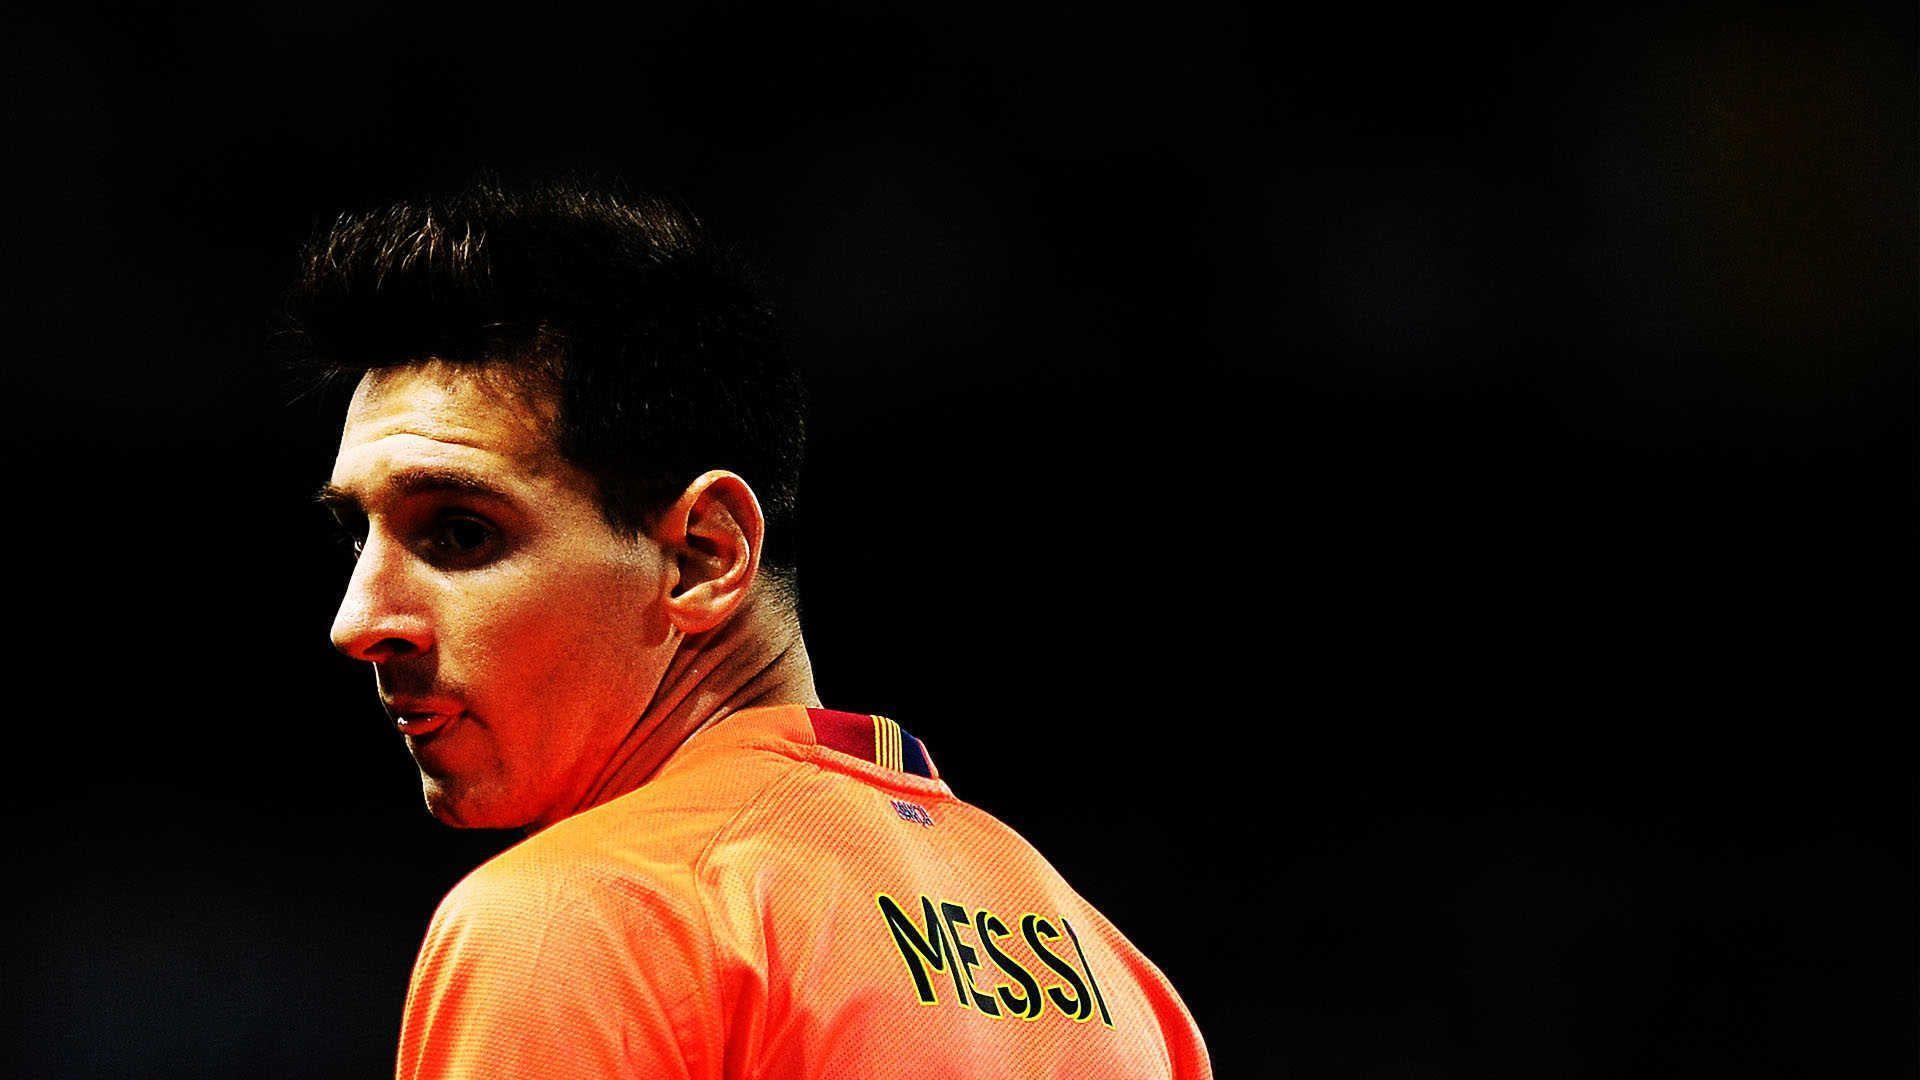 Lionel Messi Wallpaper HD. HD Wallpaper, HD Picture, Only